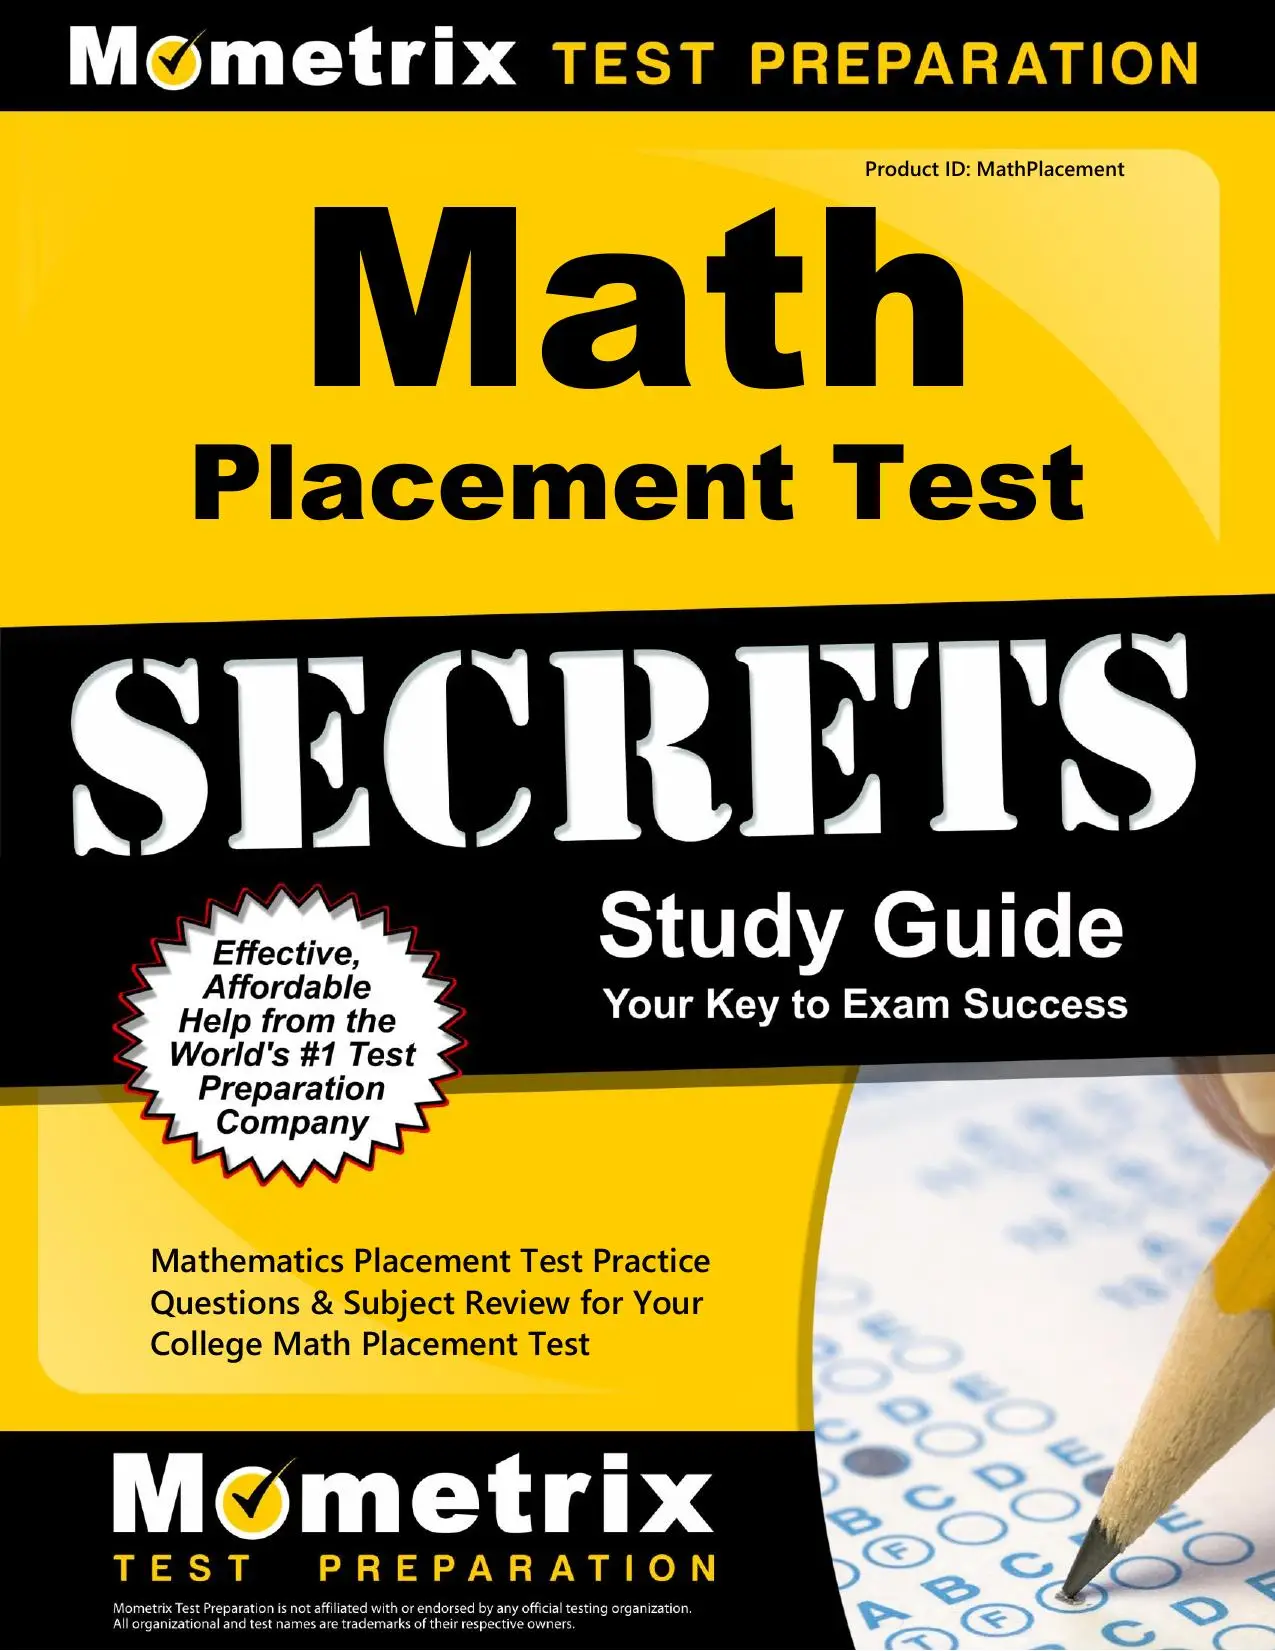 math-placement-test-secrets-study-guide-avaxhome